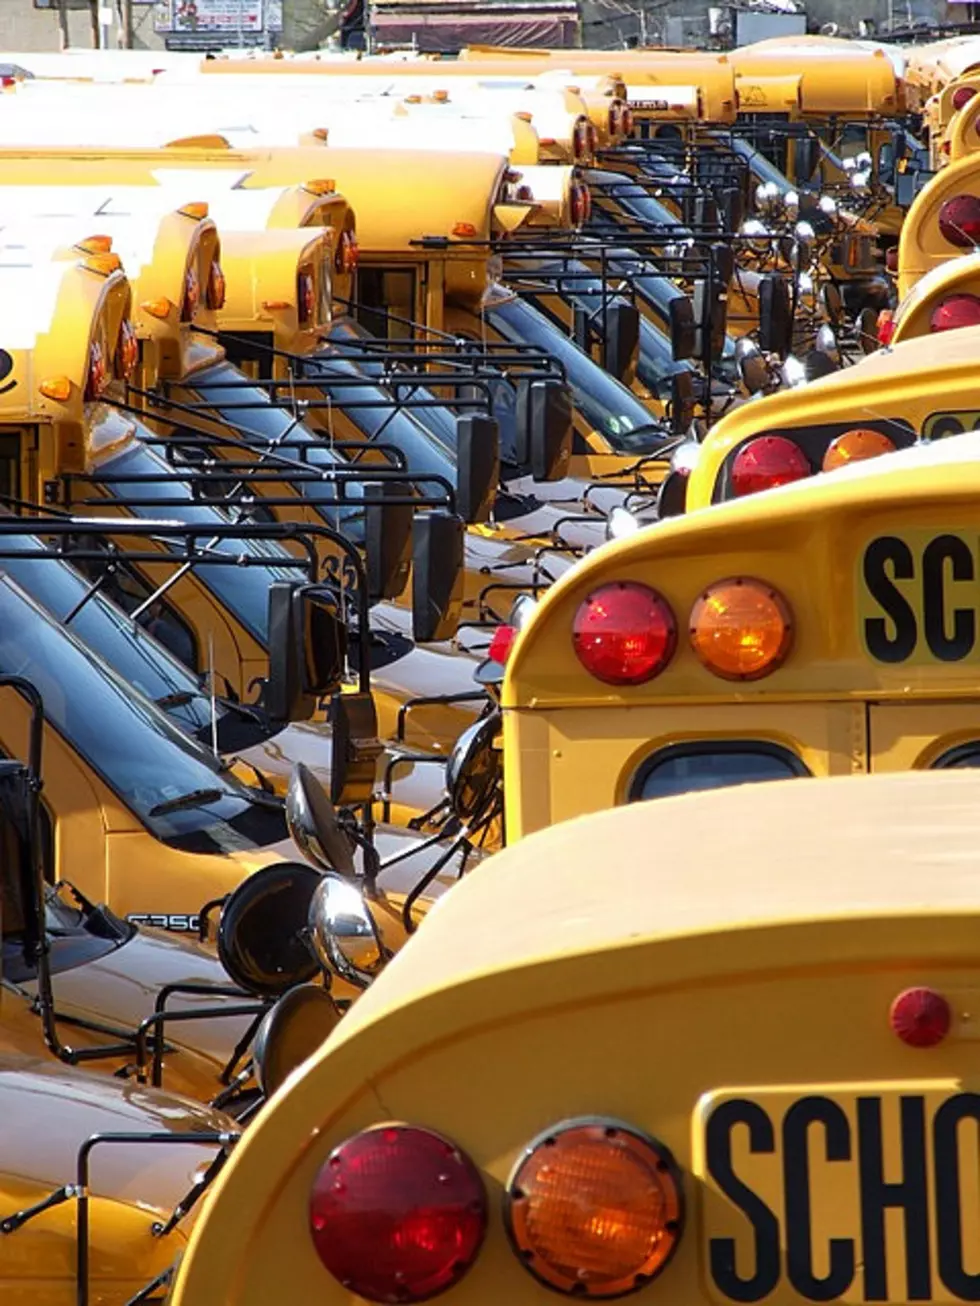 Are Criminals Riding on Your Child’s School Bus? [AUDIO]